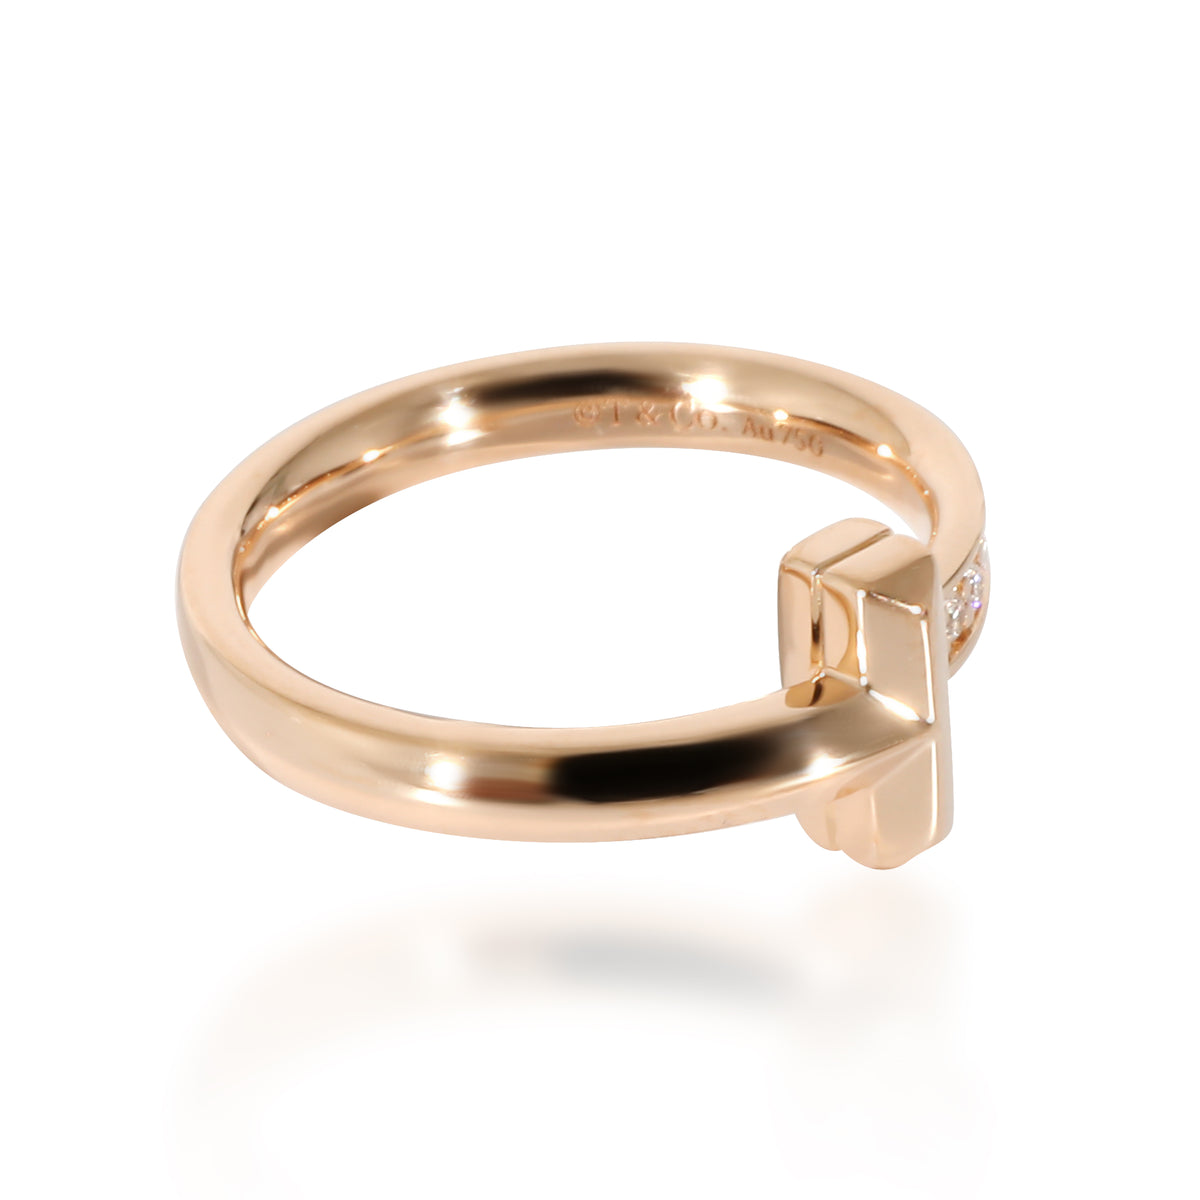 Tiffany & Co. Tiffany T Ring In 18k Rose Gold 0.08 CTW Ring US 5.25